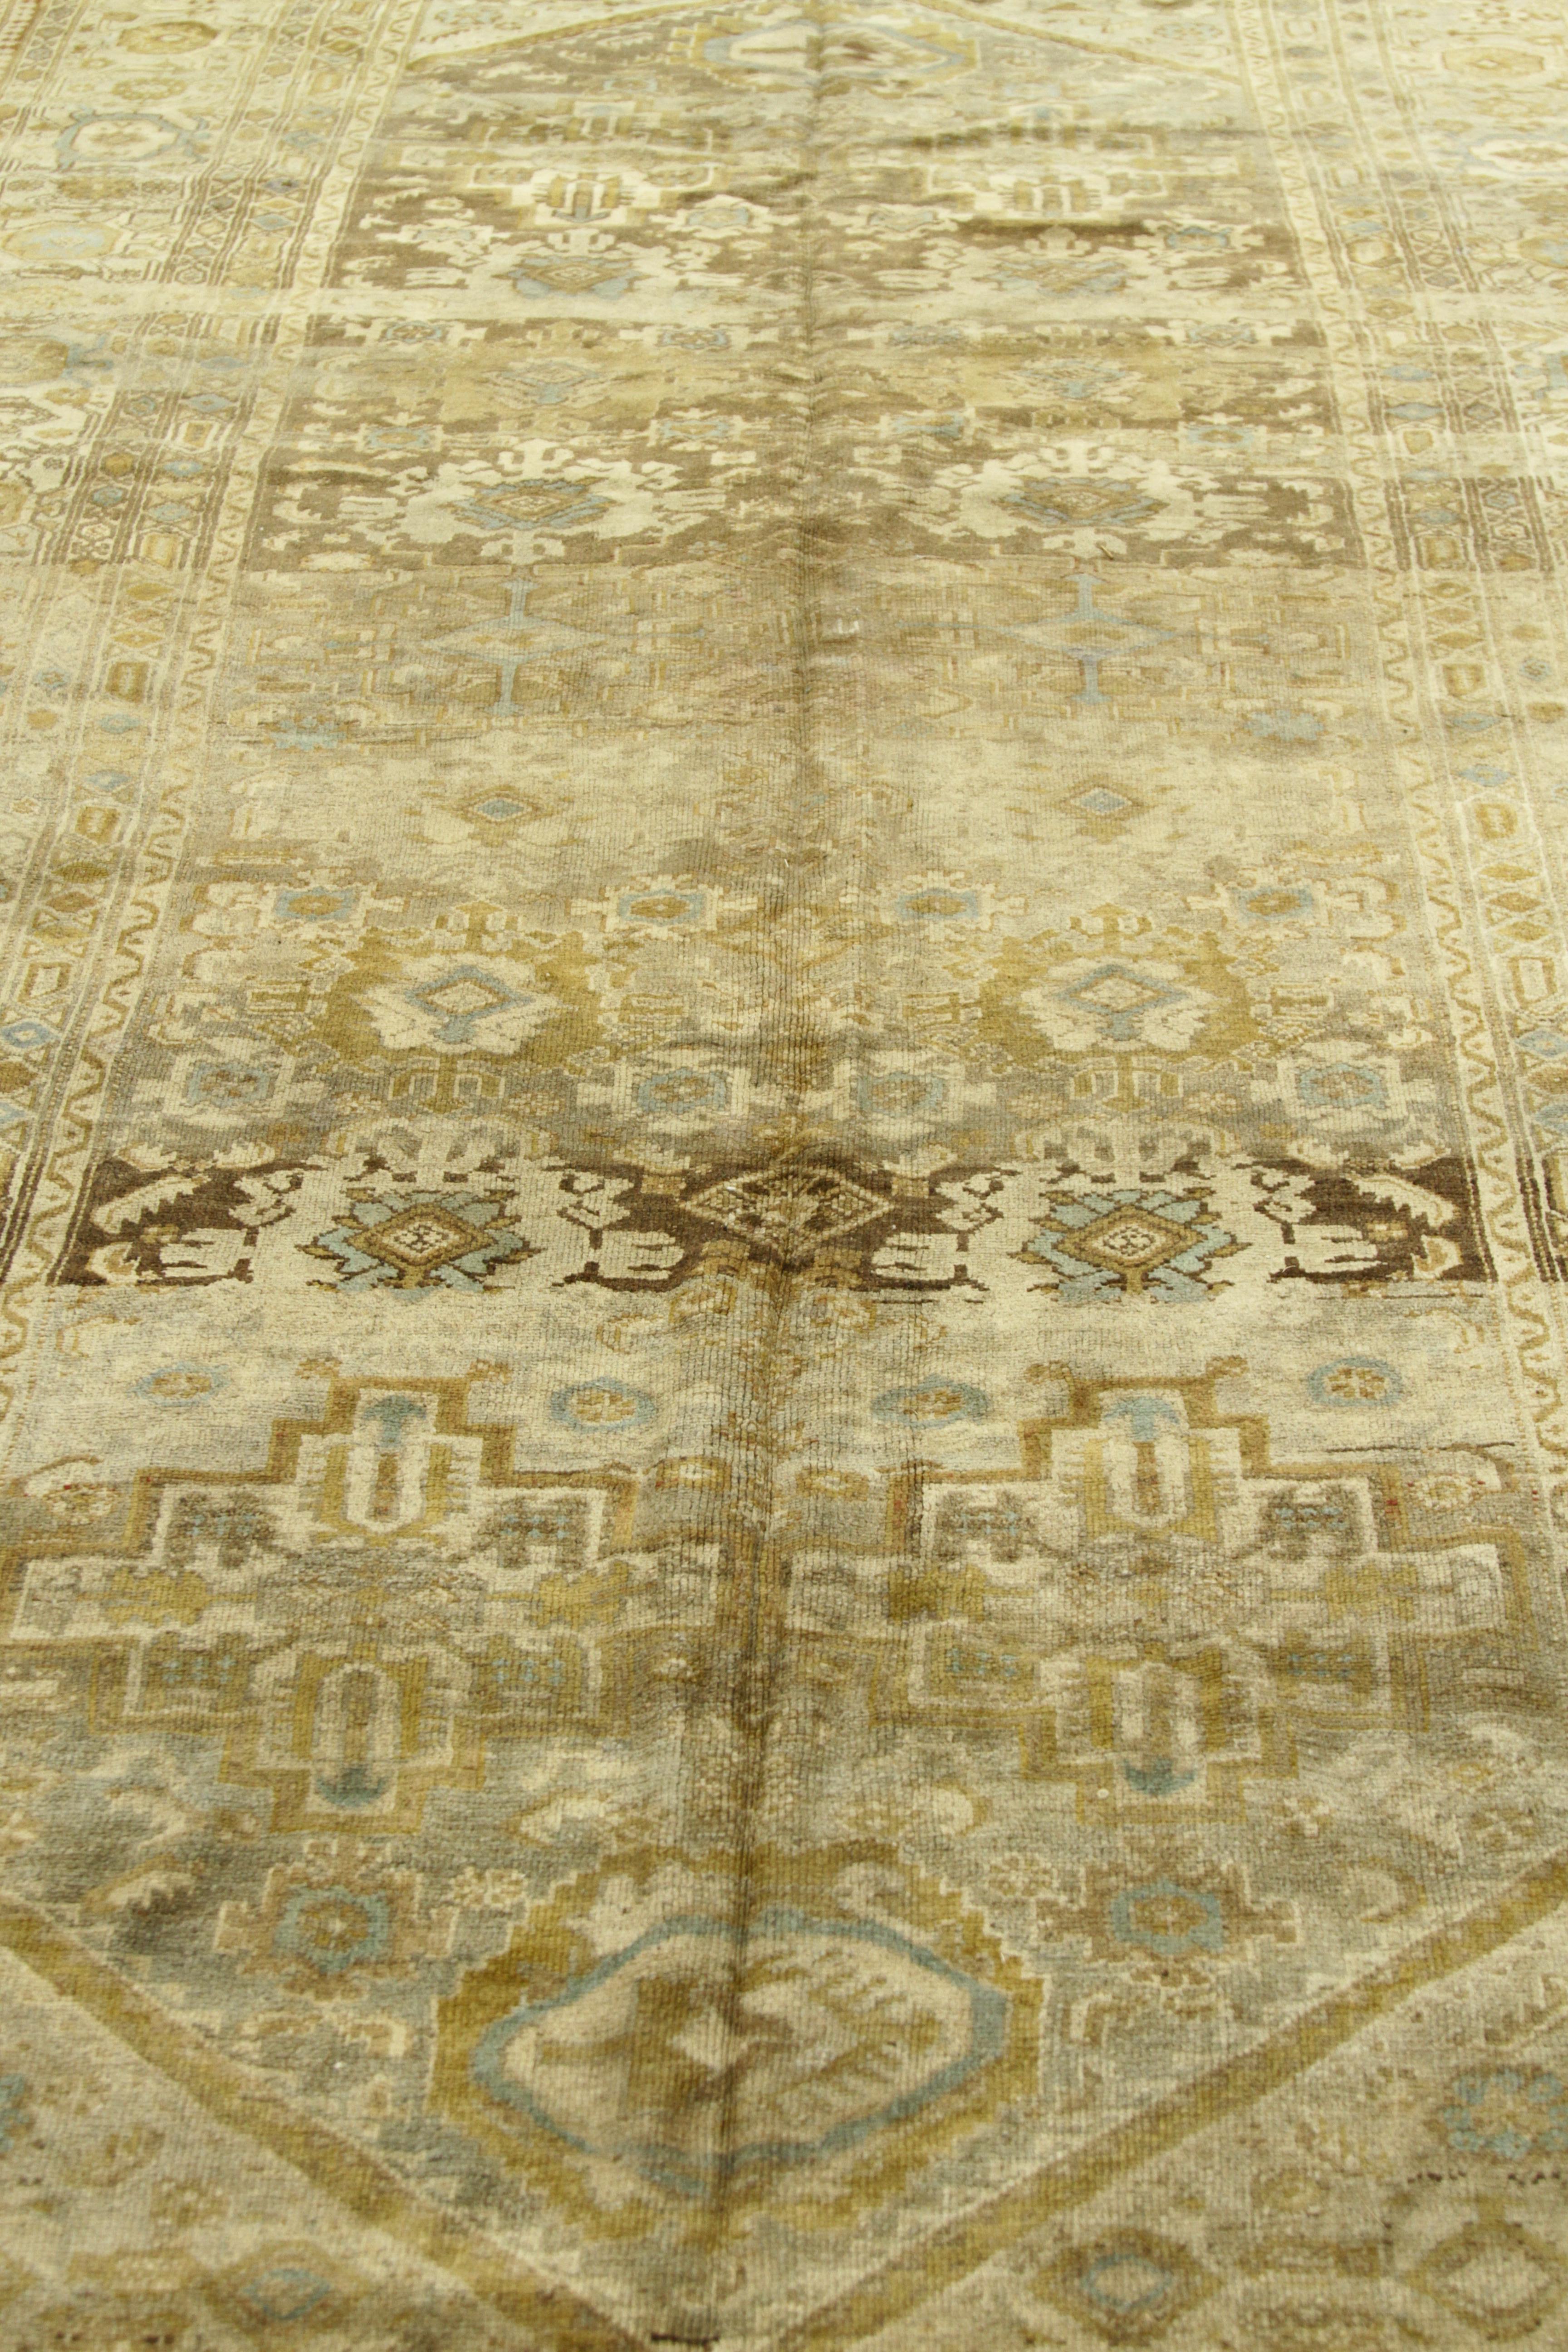 Wool Persian Rug Malayer Design with Fading Rustic Floral Patterns, circa 1940 For Sale